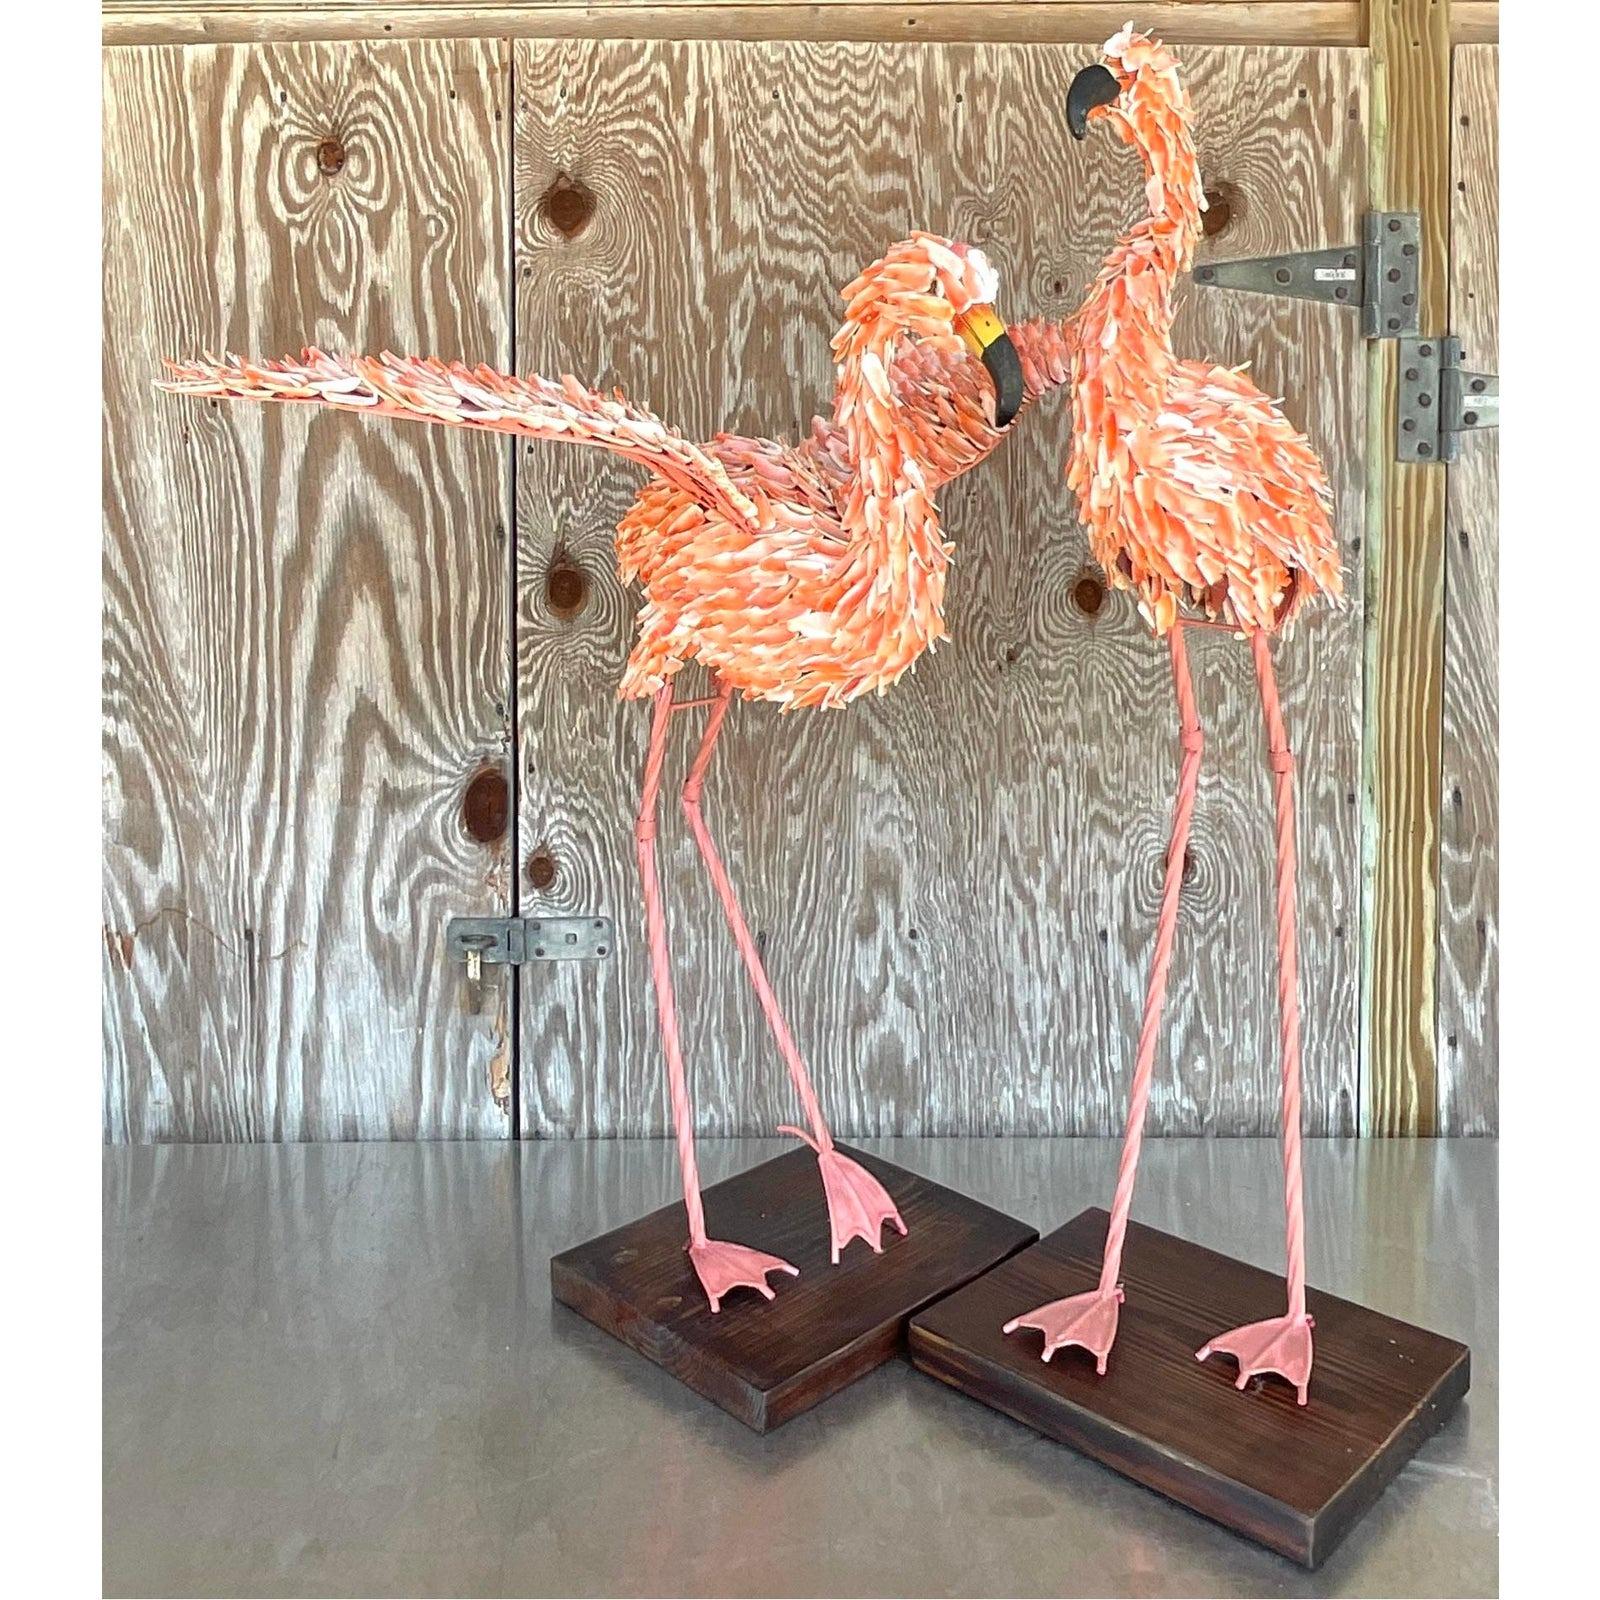 A fabulous set of two vintage Coastal flamingos. Hand encrusted with the most beautiful pink shells. Stand on wooden plinths. These are indoor birds thst will add a little tropical charm to any space. Acquired from a Palm Beach estate.

Second